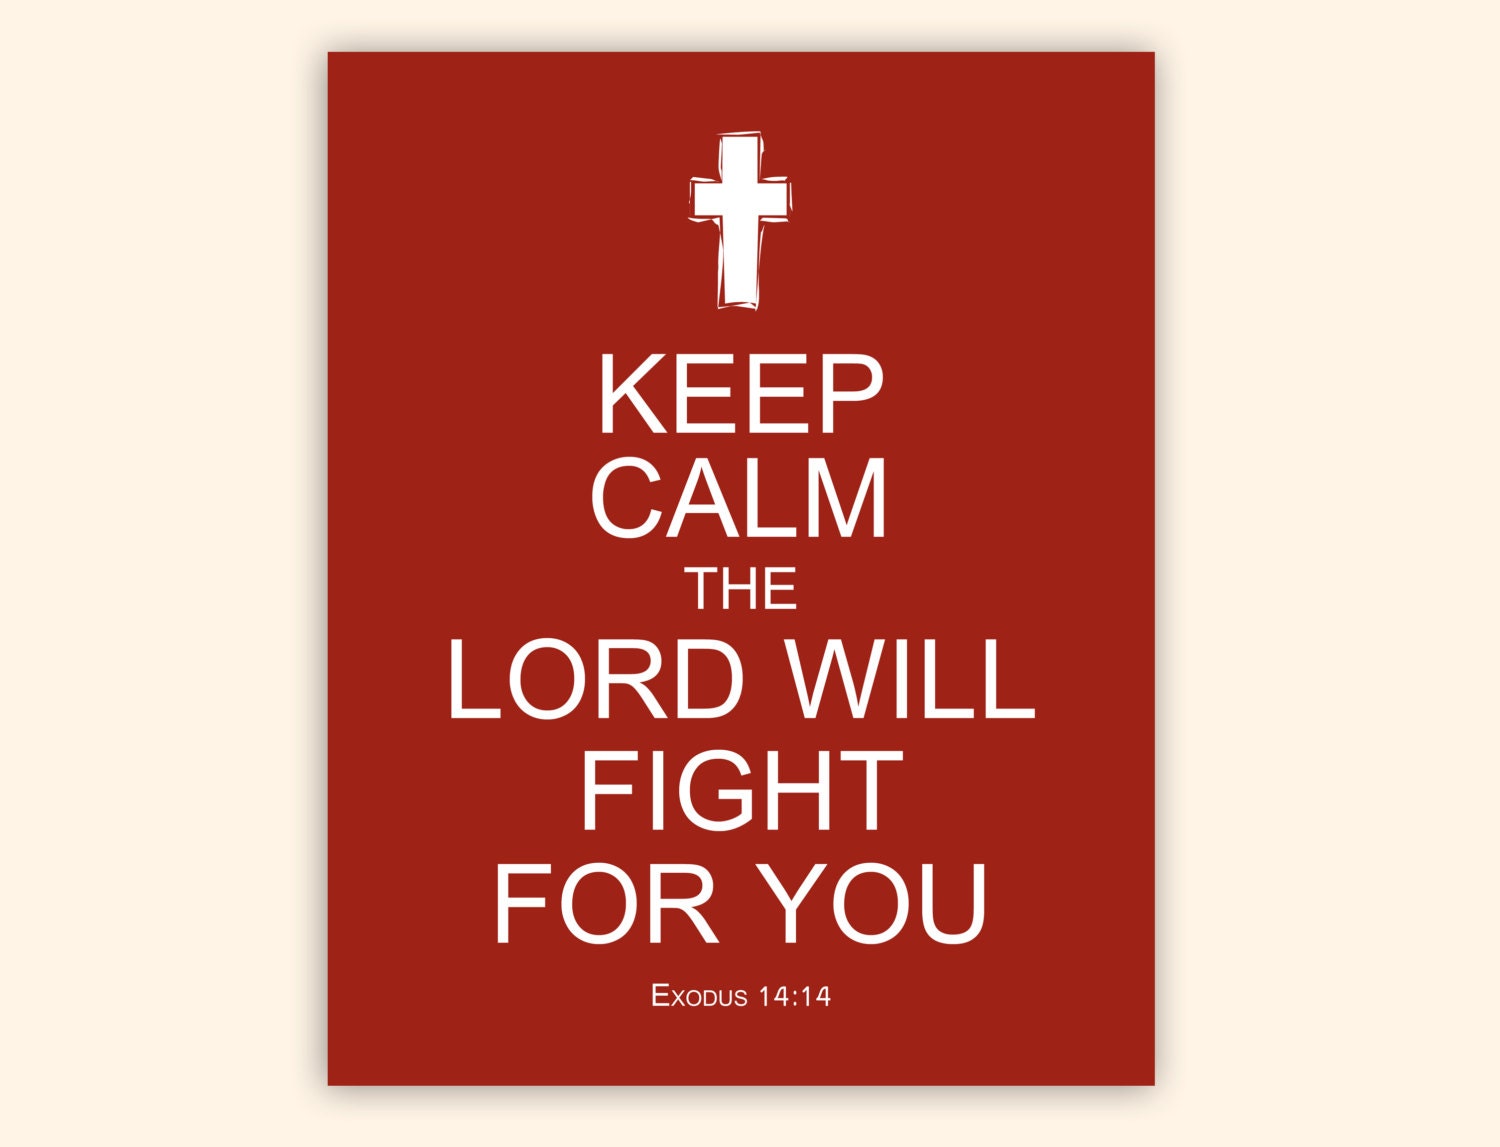 Keep Calm The Lord Will Fight For You Scripture Bible Quote Printable Art Wall Decor Digital JPEG File - CoriNicholsDesigns